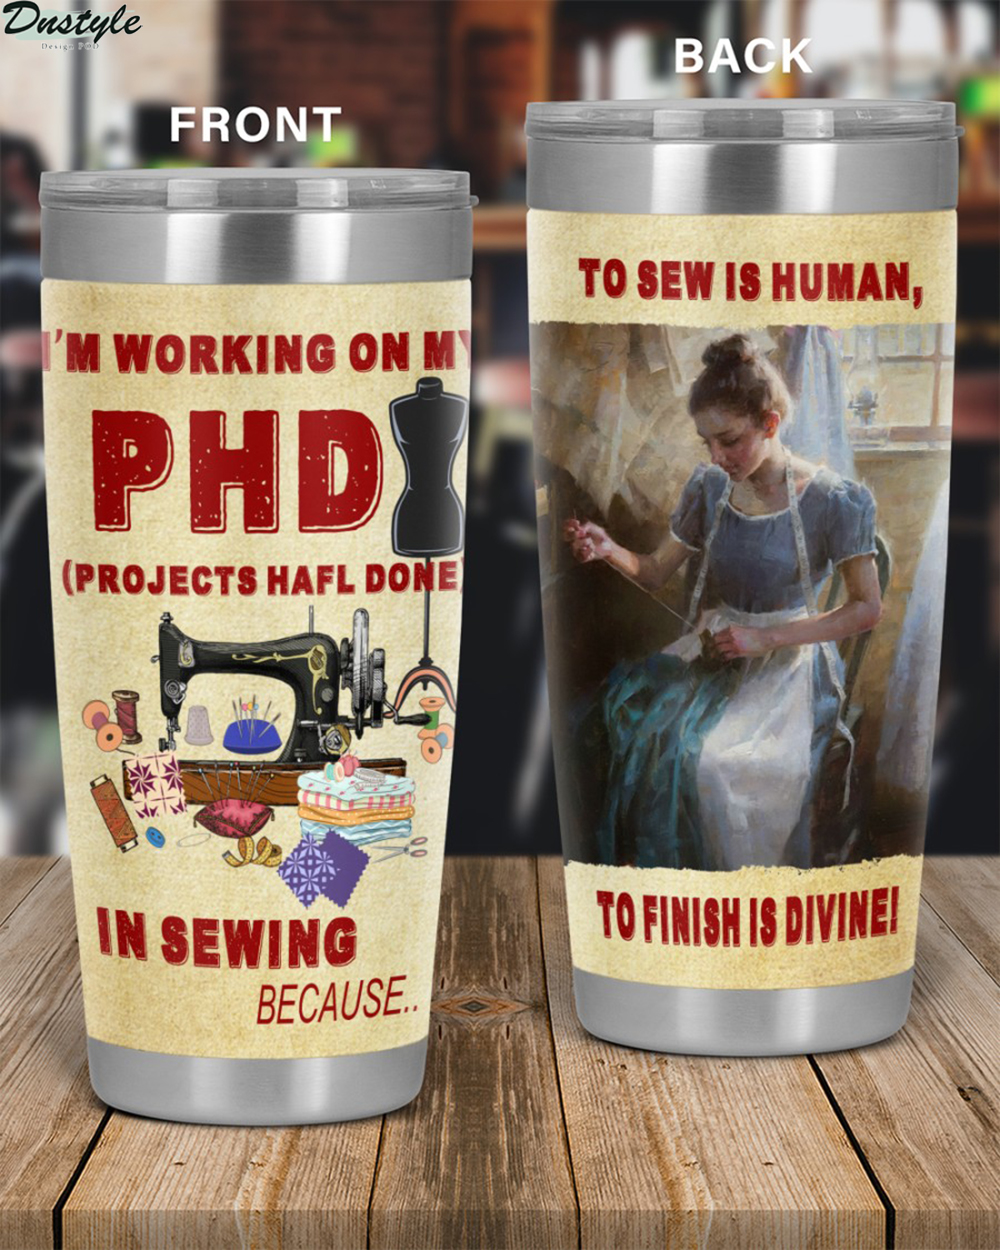 I'm working on my PHD in sewing tumbler 1